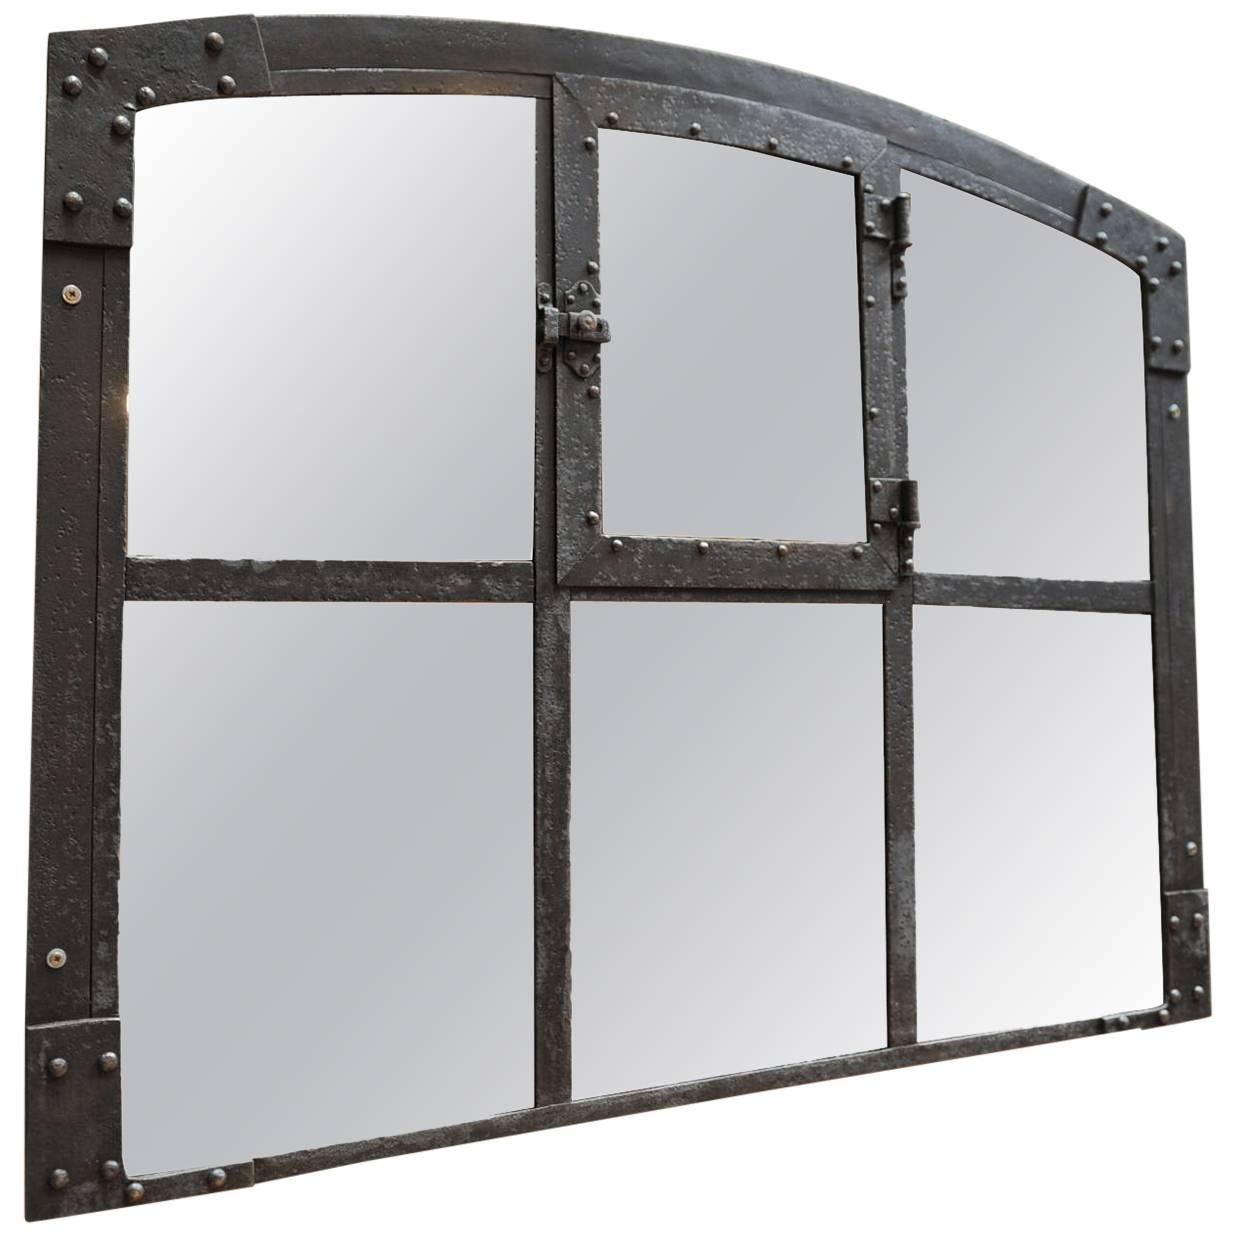 Riveted Iron Factory Window 1900 in Industrial Mirror